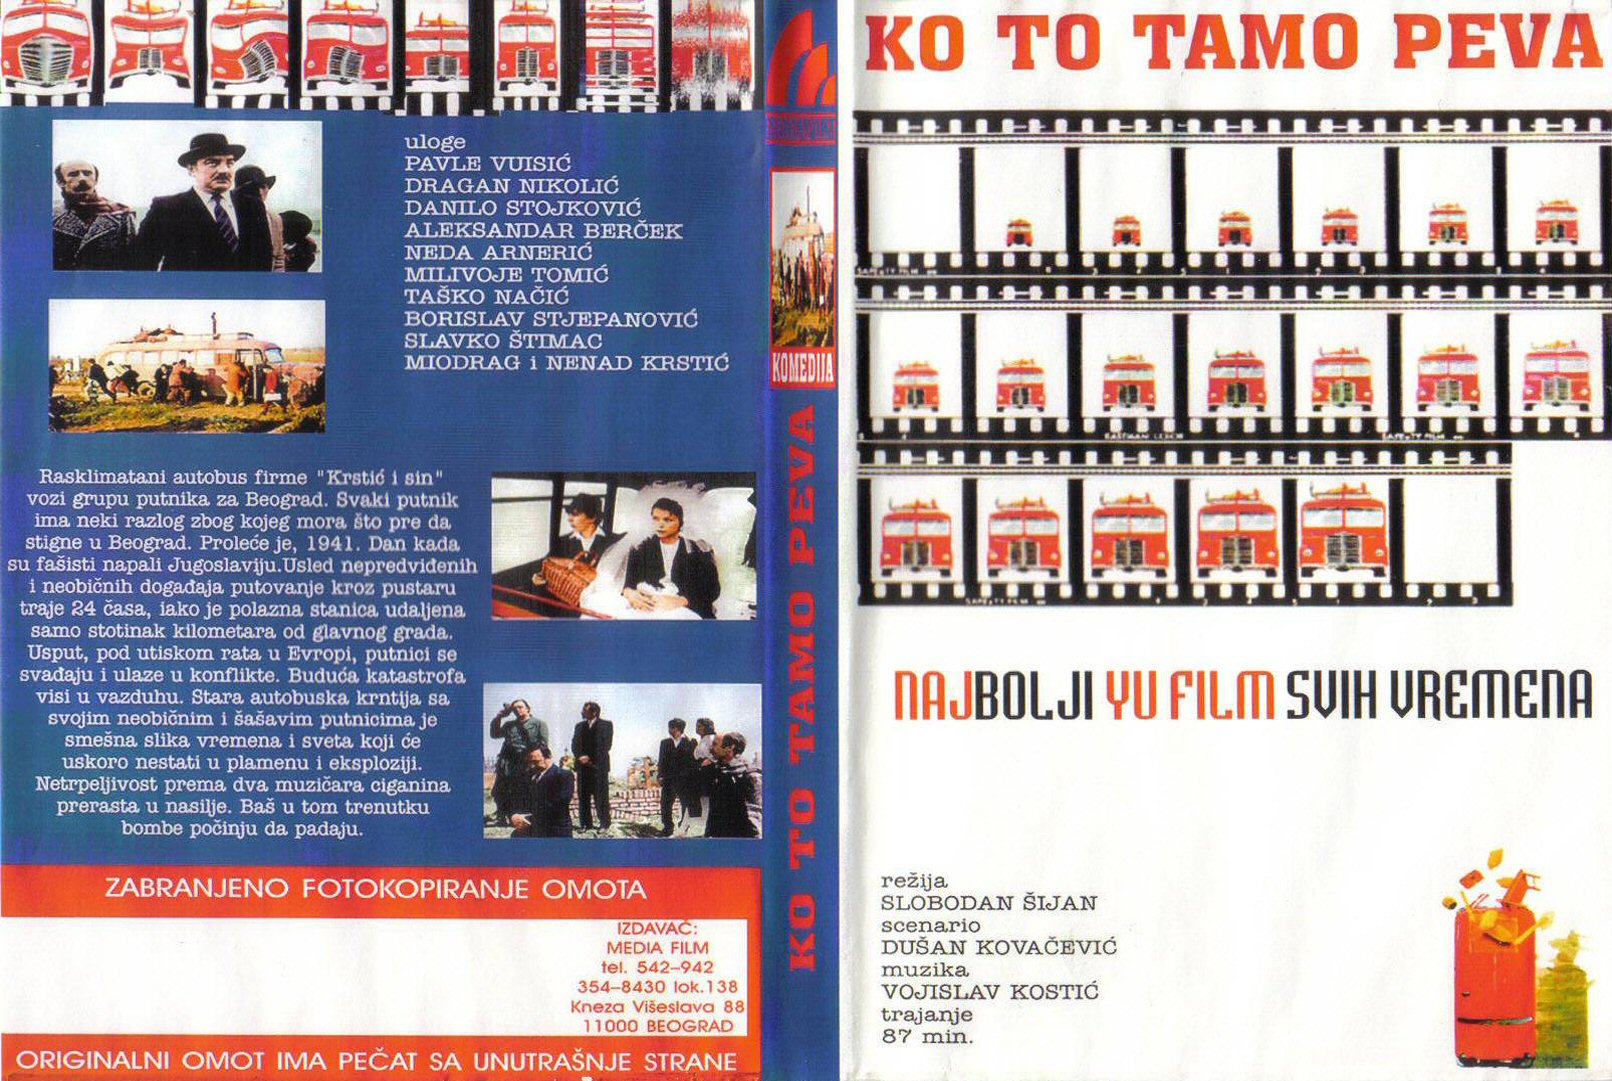 Click to view full size image -  DVD Cover - K - ko_to_tamo_peva_dvd_v2 - ko_to_tamo_peva_dvd_v2.jpg